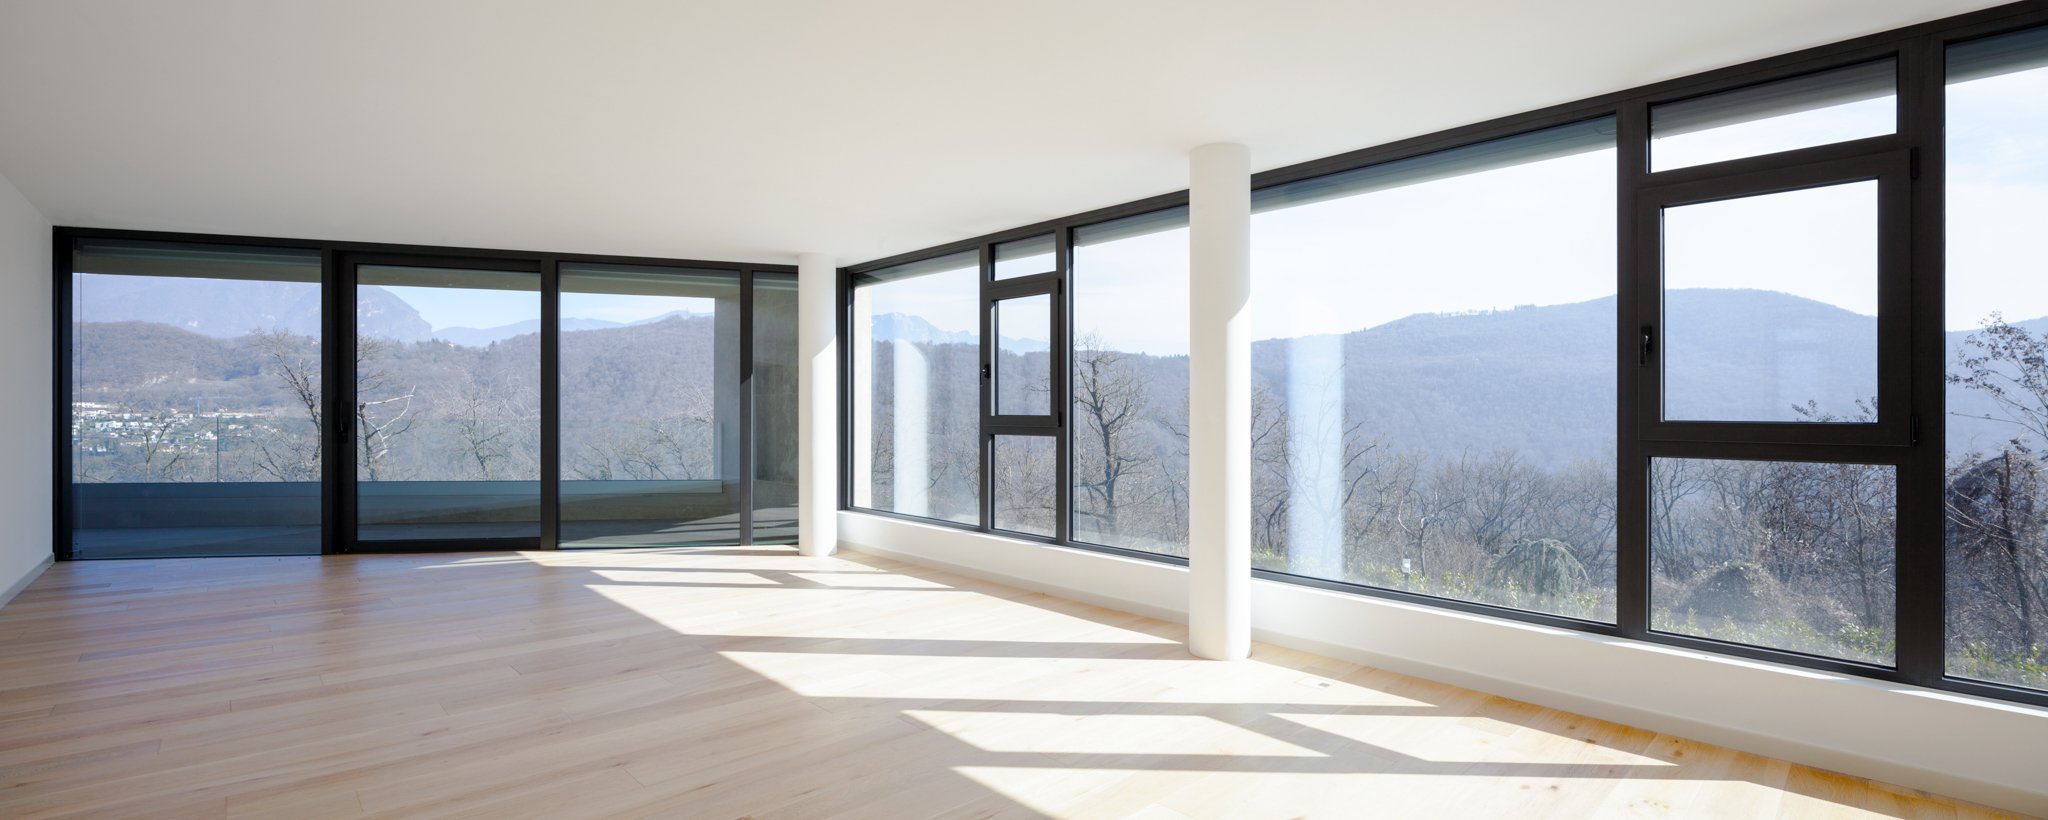 A bright room with windows facing the outside in all direction.